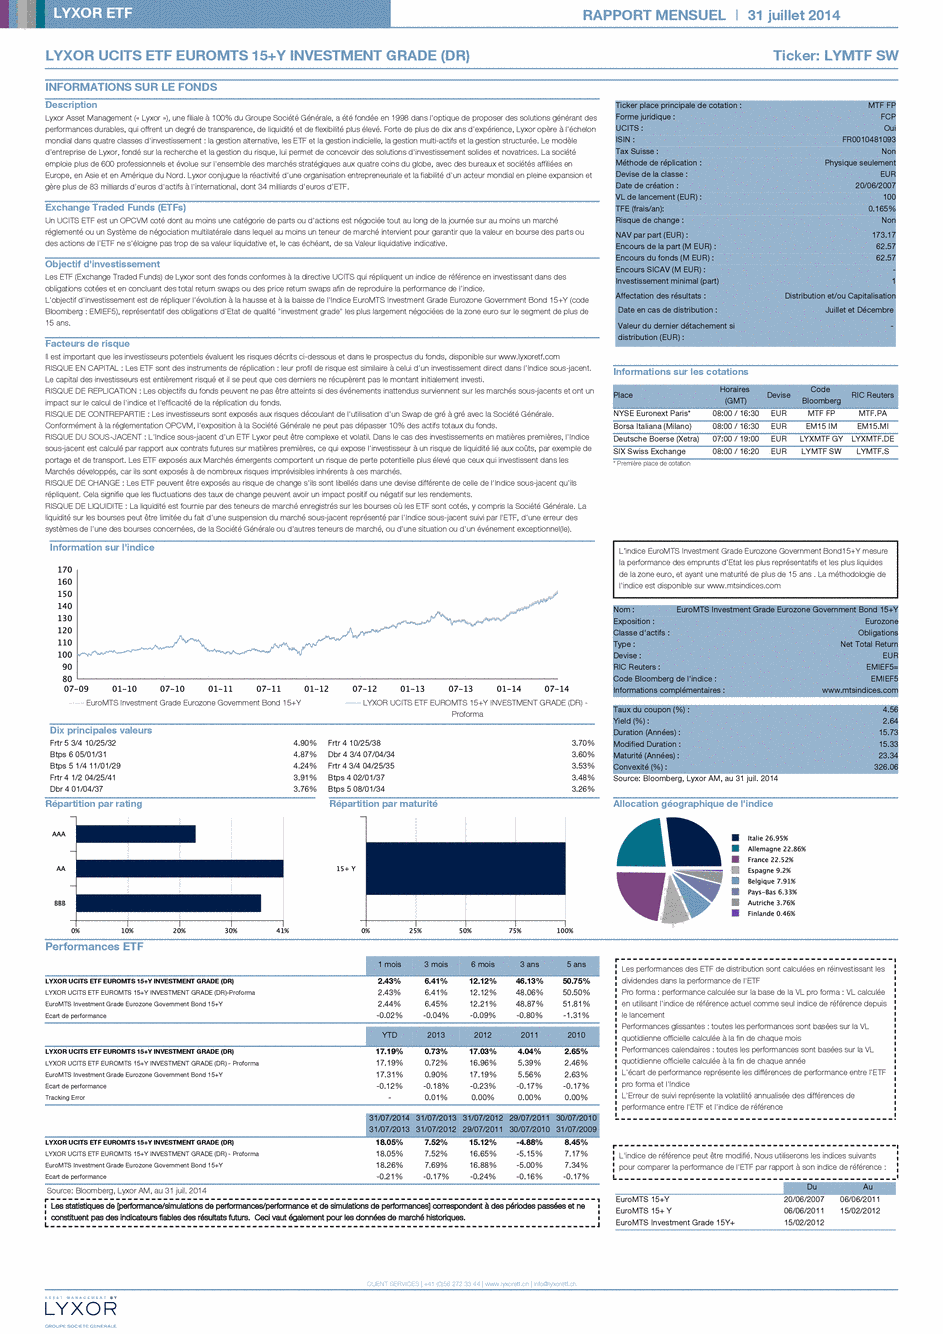 Reporting LYXOR UCITS ETF EUROMTS 15+Y INVESTMENT GRADE (DR) - 31/07/2014 - Français